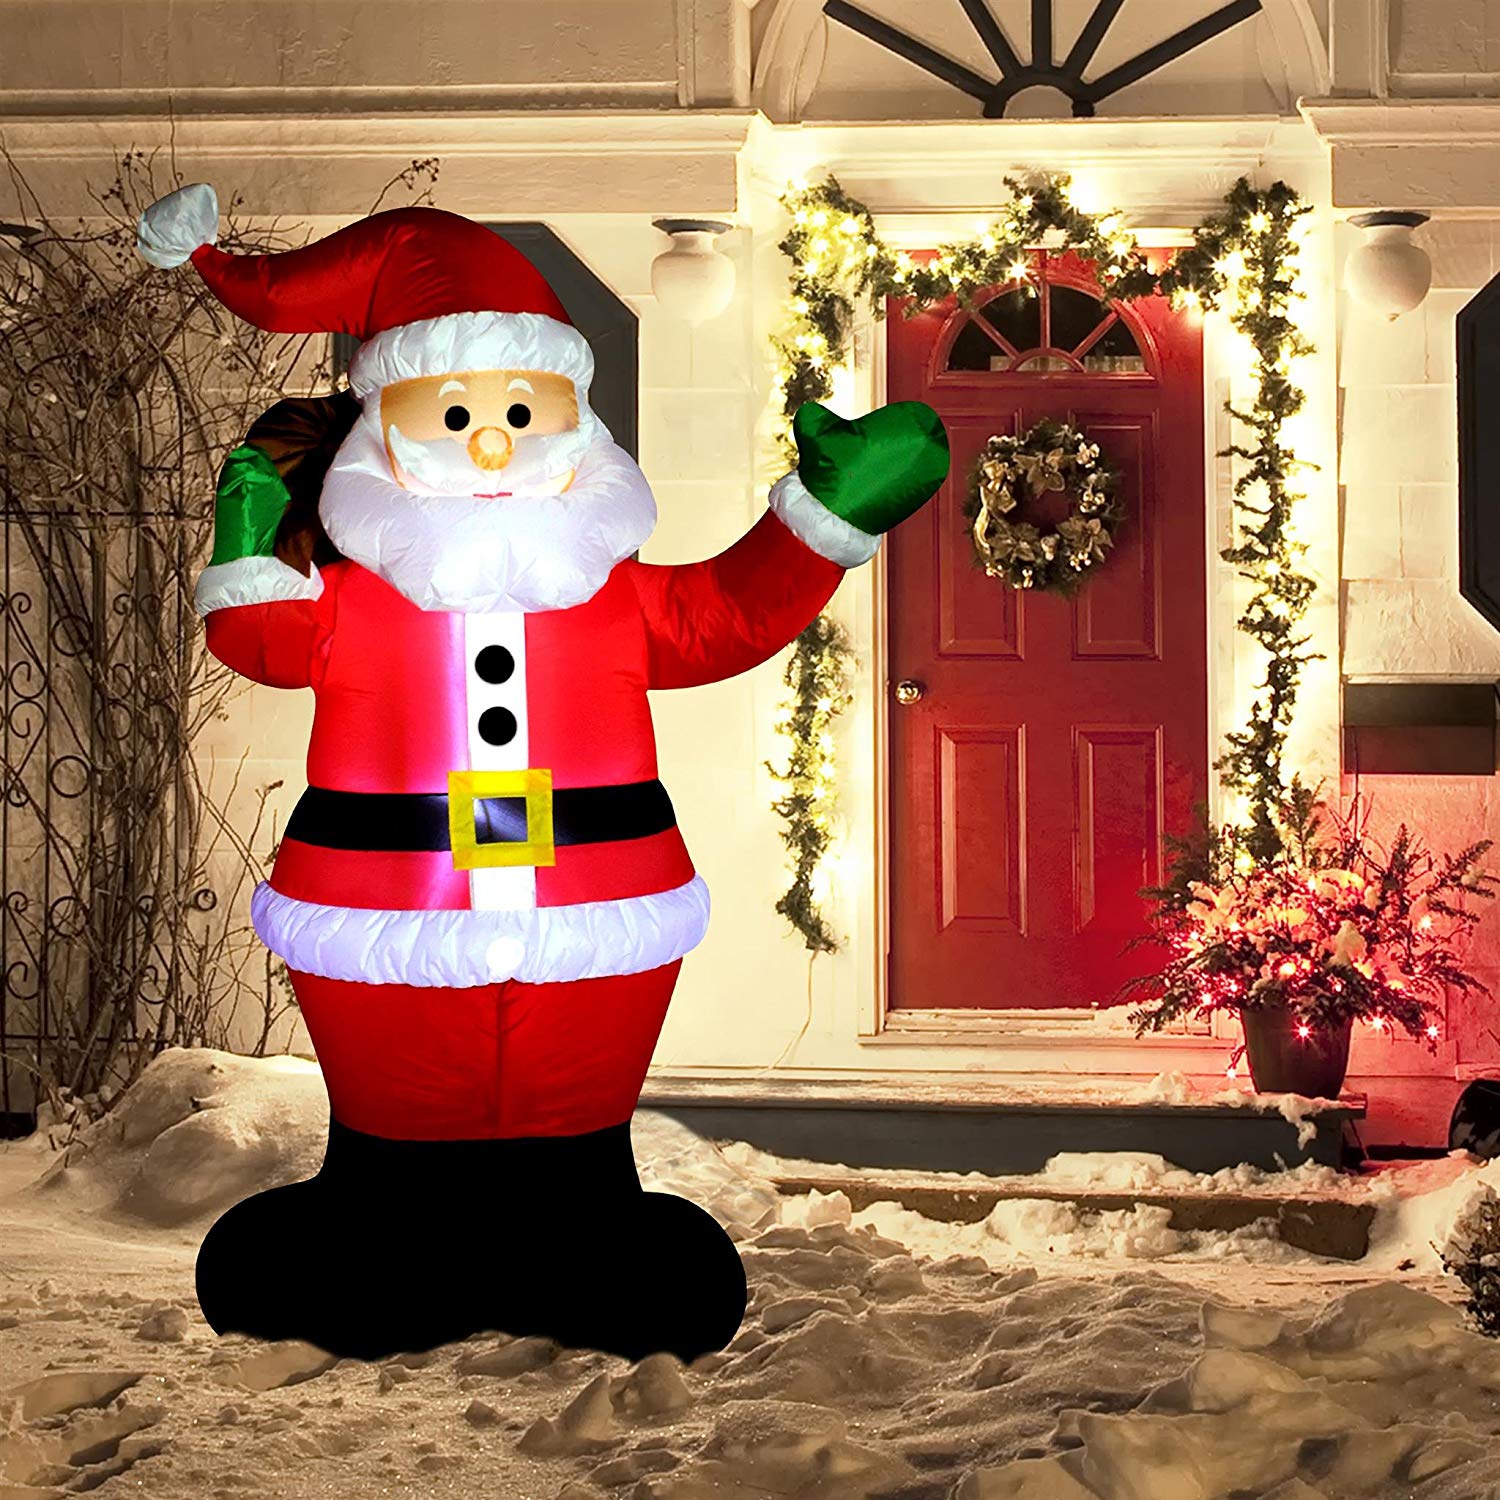 Christmas Inflatable Decoration 6 Foot Santa Claus LED Light Up Giant